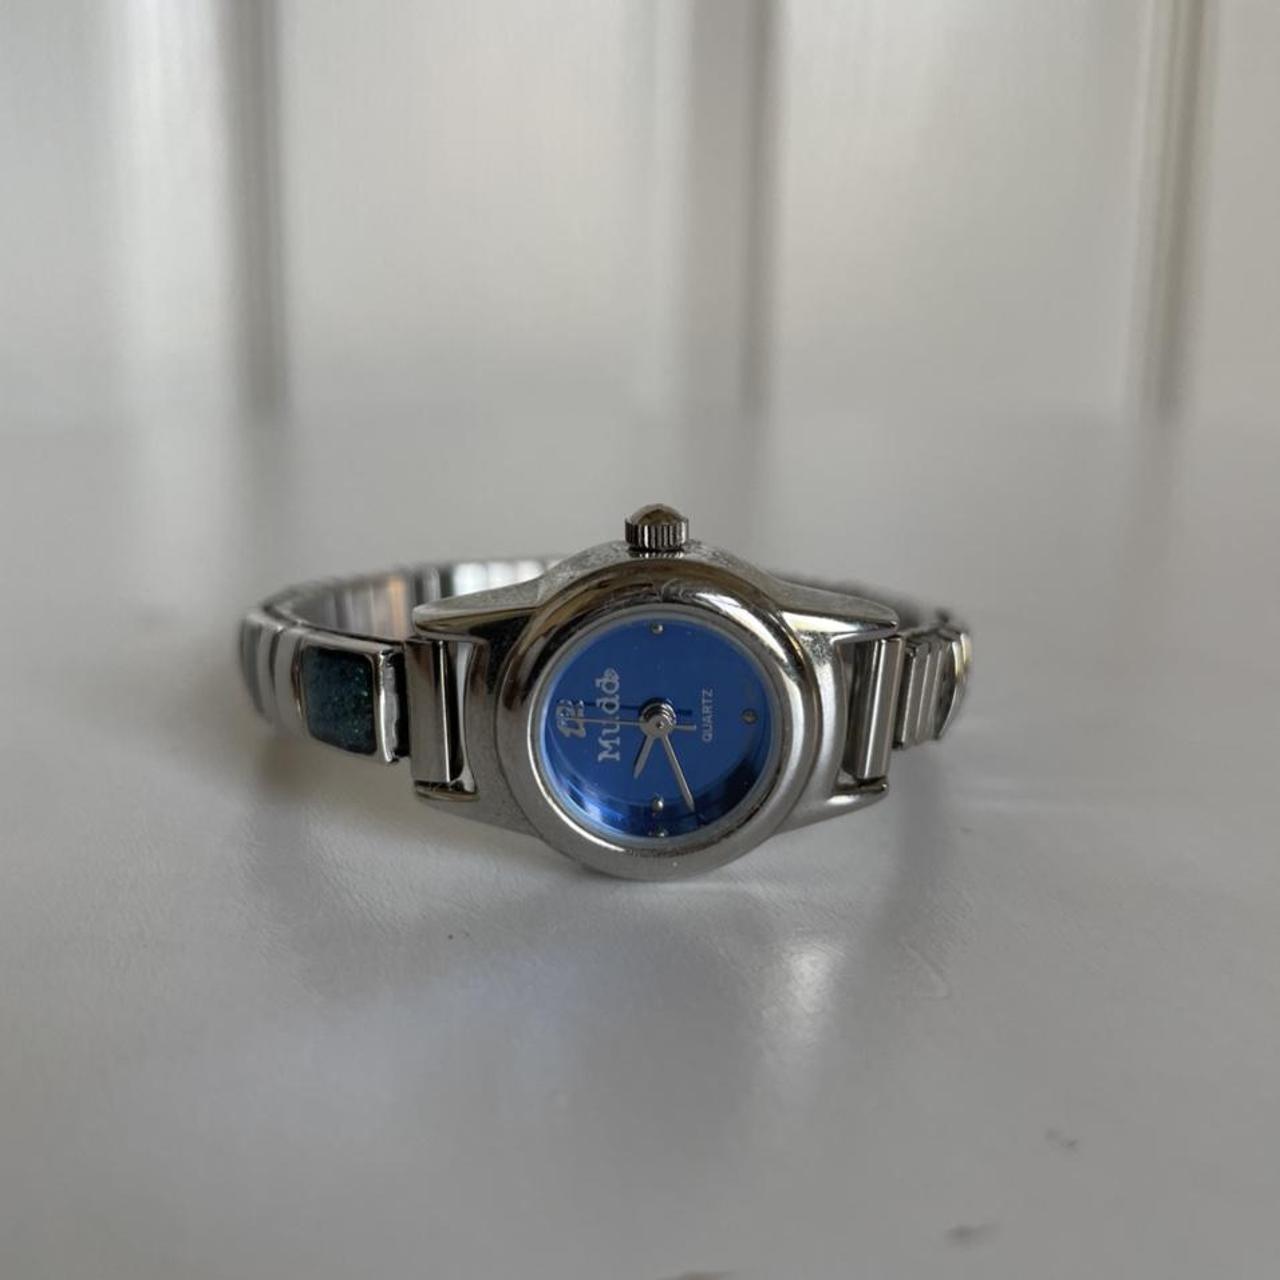 Mudd Clothing Women's Blue and Silver Watch